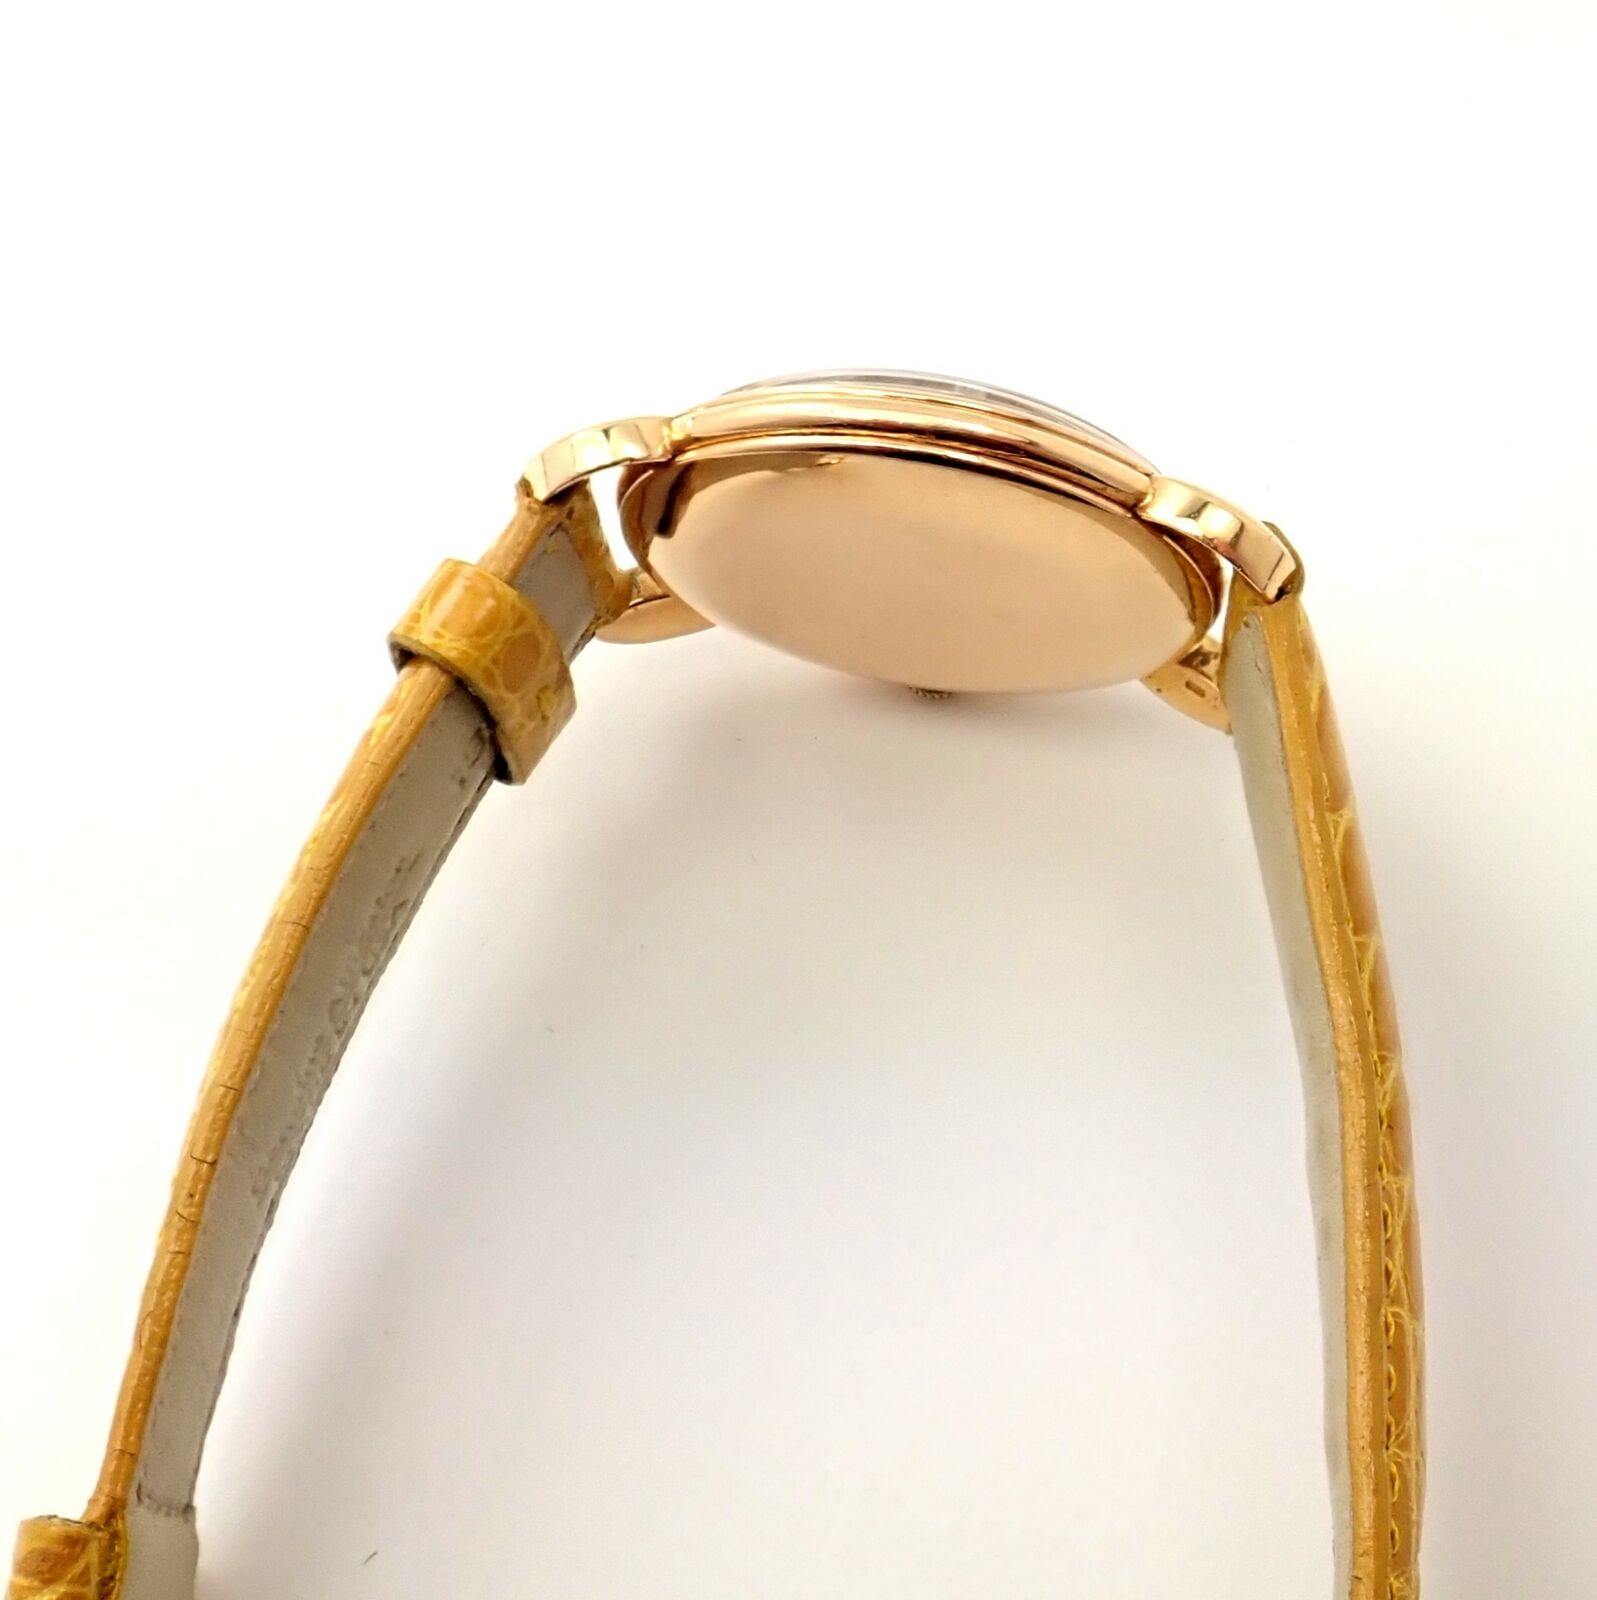 Movado Jewelry & Watches:Watches, Parts & Accessories:Watches:Wristwatches Movado 18k Yellow Gold Automatic Bumper Yellow Alligator Band Watch R8405